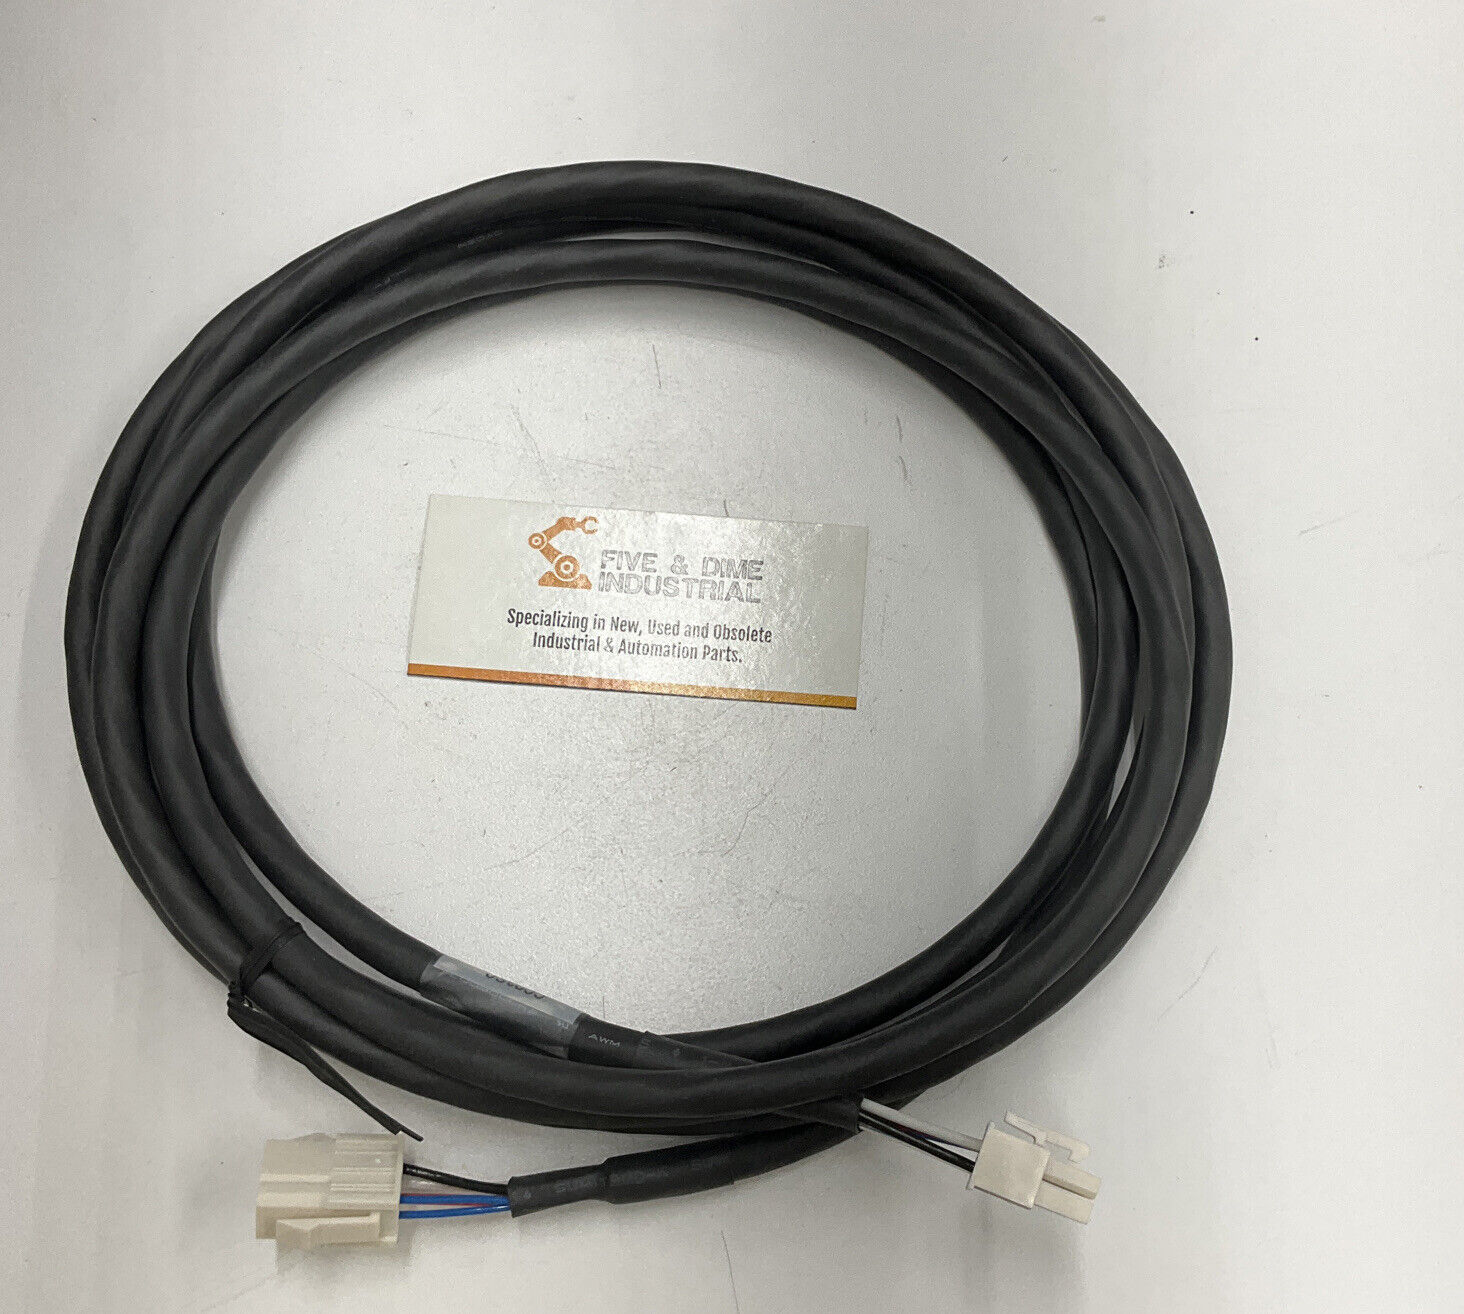 Oriental Motor Company CC03SC New Connection Cable 3 Meters (CBL141)